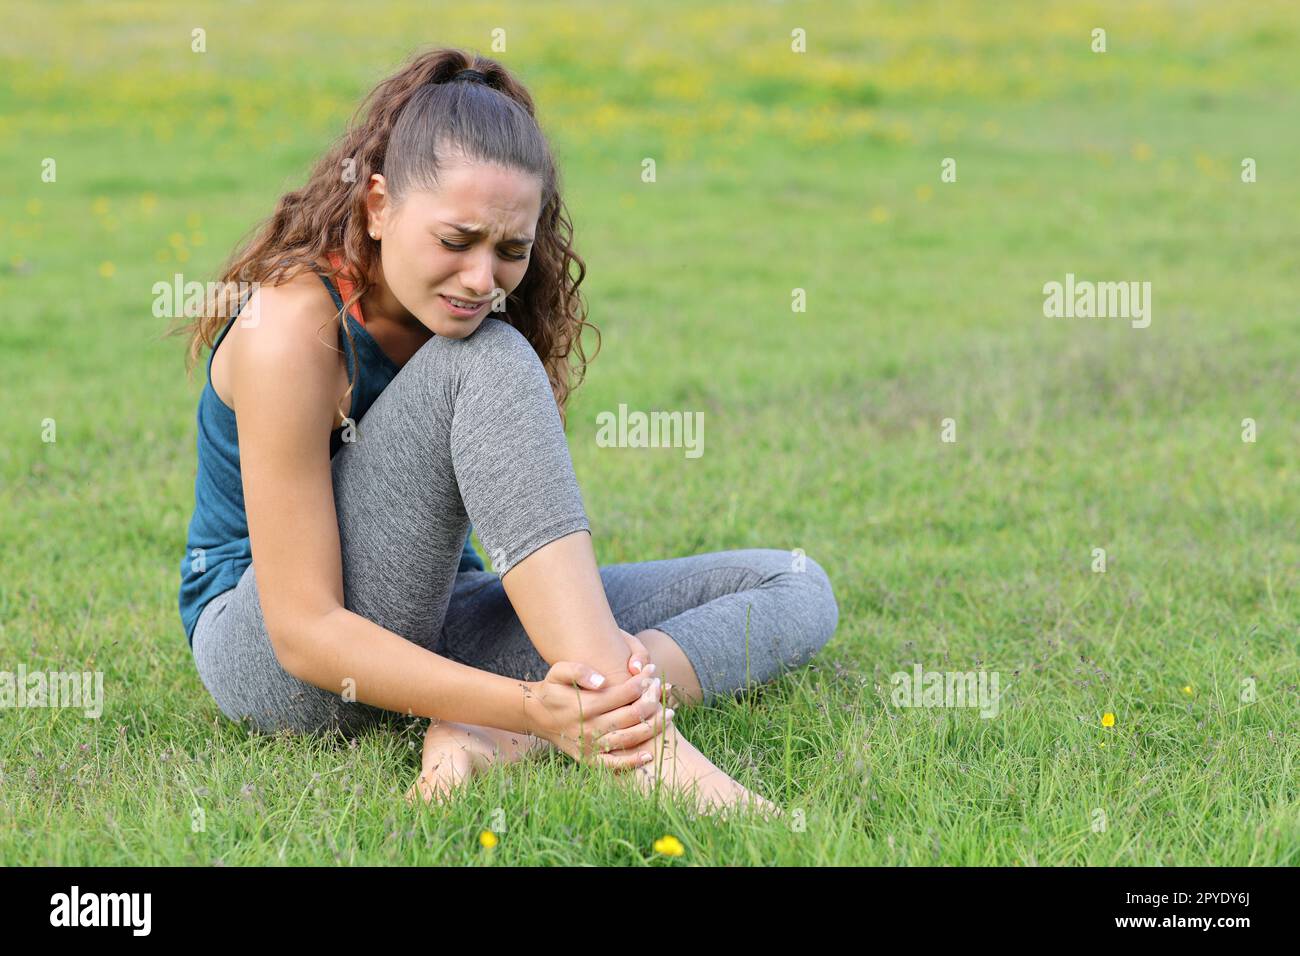 Yogi suffering ankle ache on the grass Stock Photo